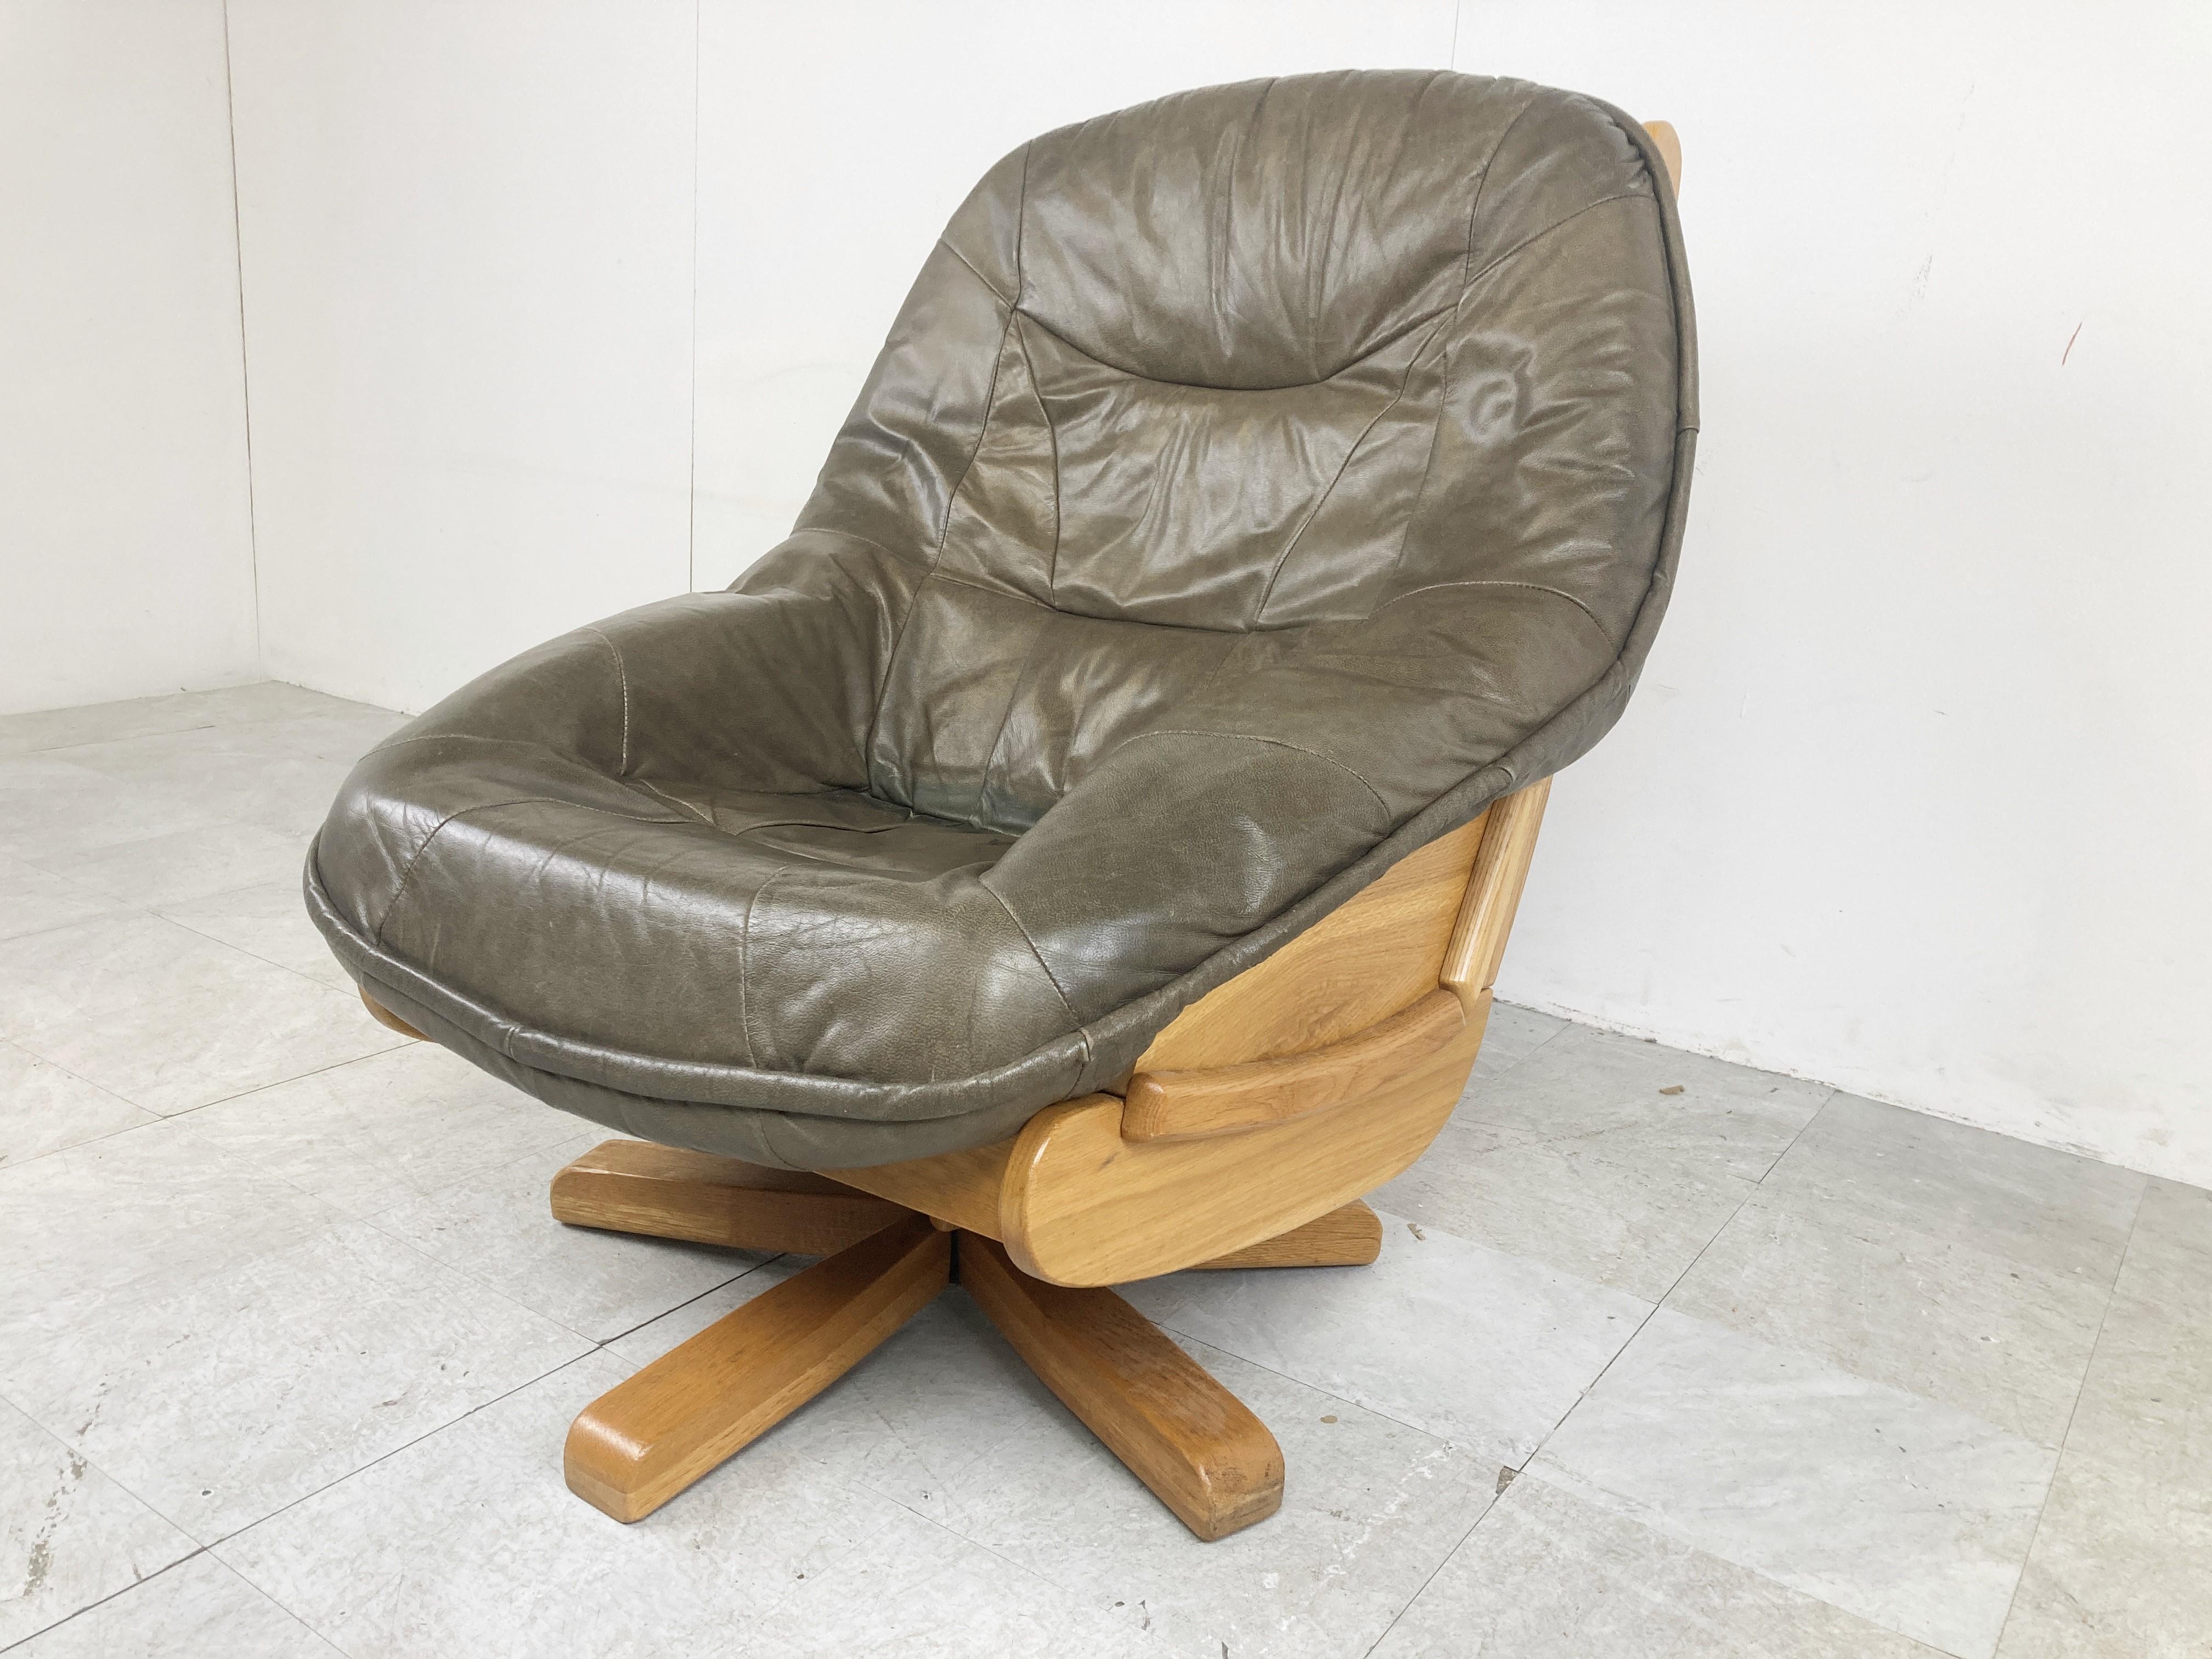 Brutalist Oak and Leather Swivel Chair, 1970s For Sale 1